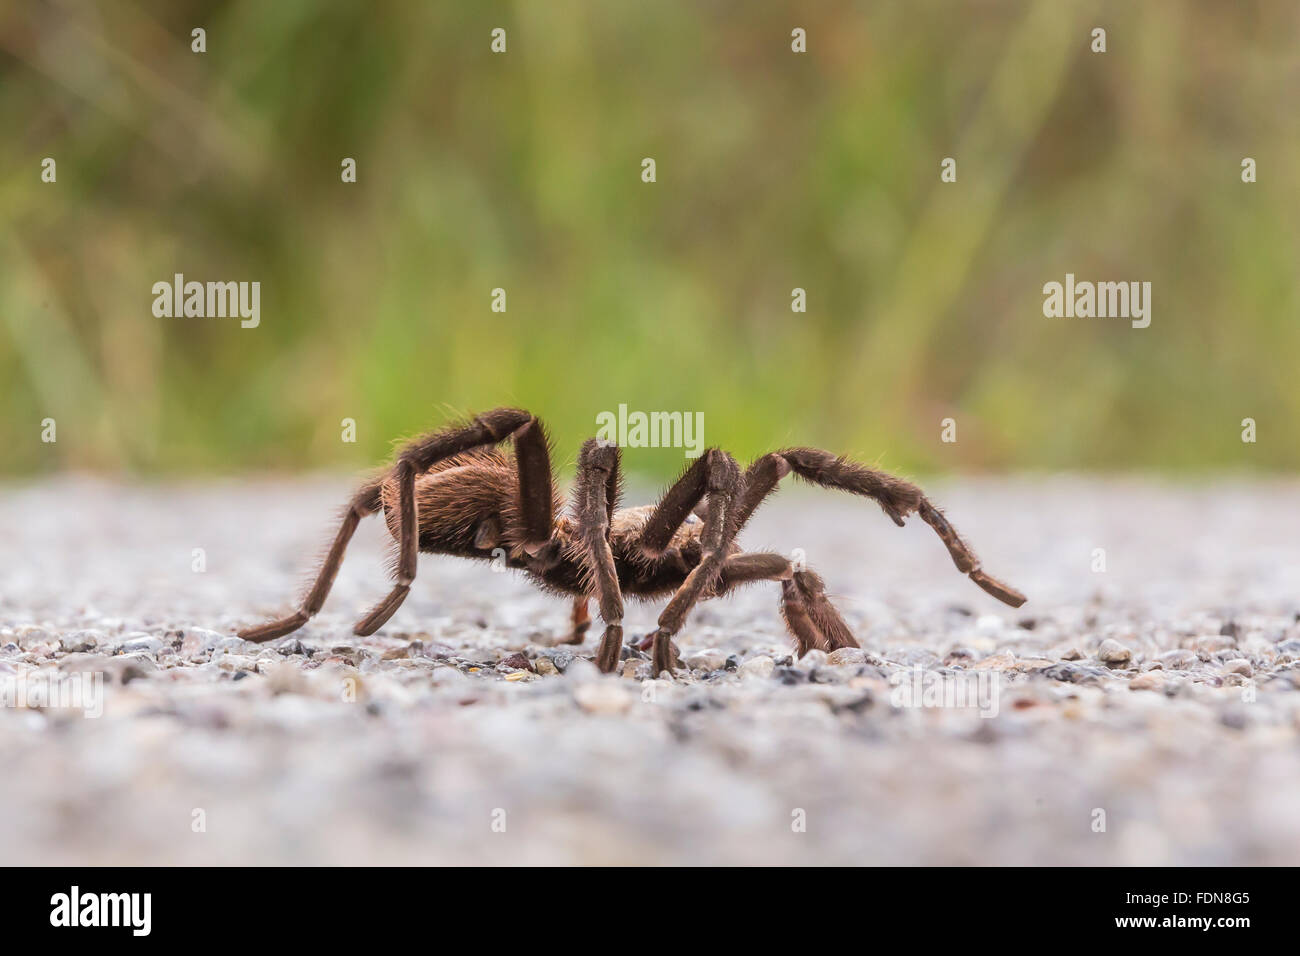 Male tarantula, Aphonopelma sp. in Chihuahuan Desert in Organ Mountains–Desert Peaks National Monument, New Mexico, USA Stock Photo